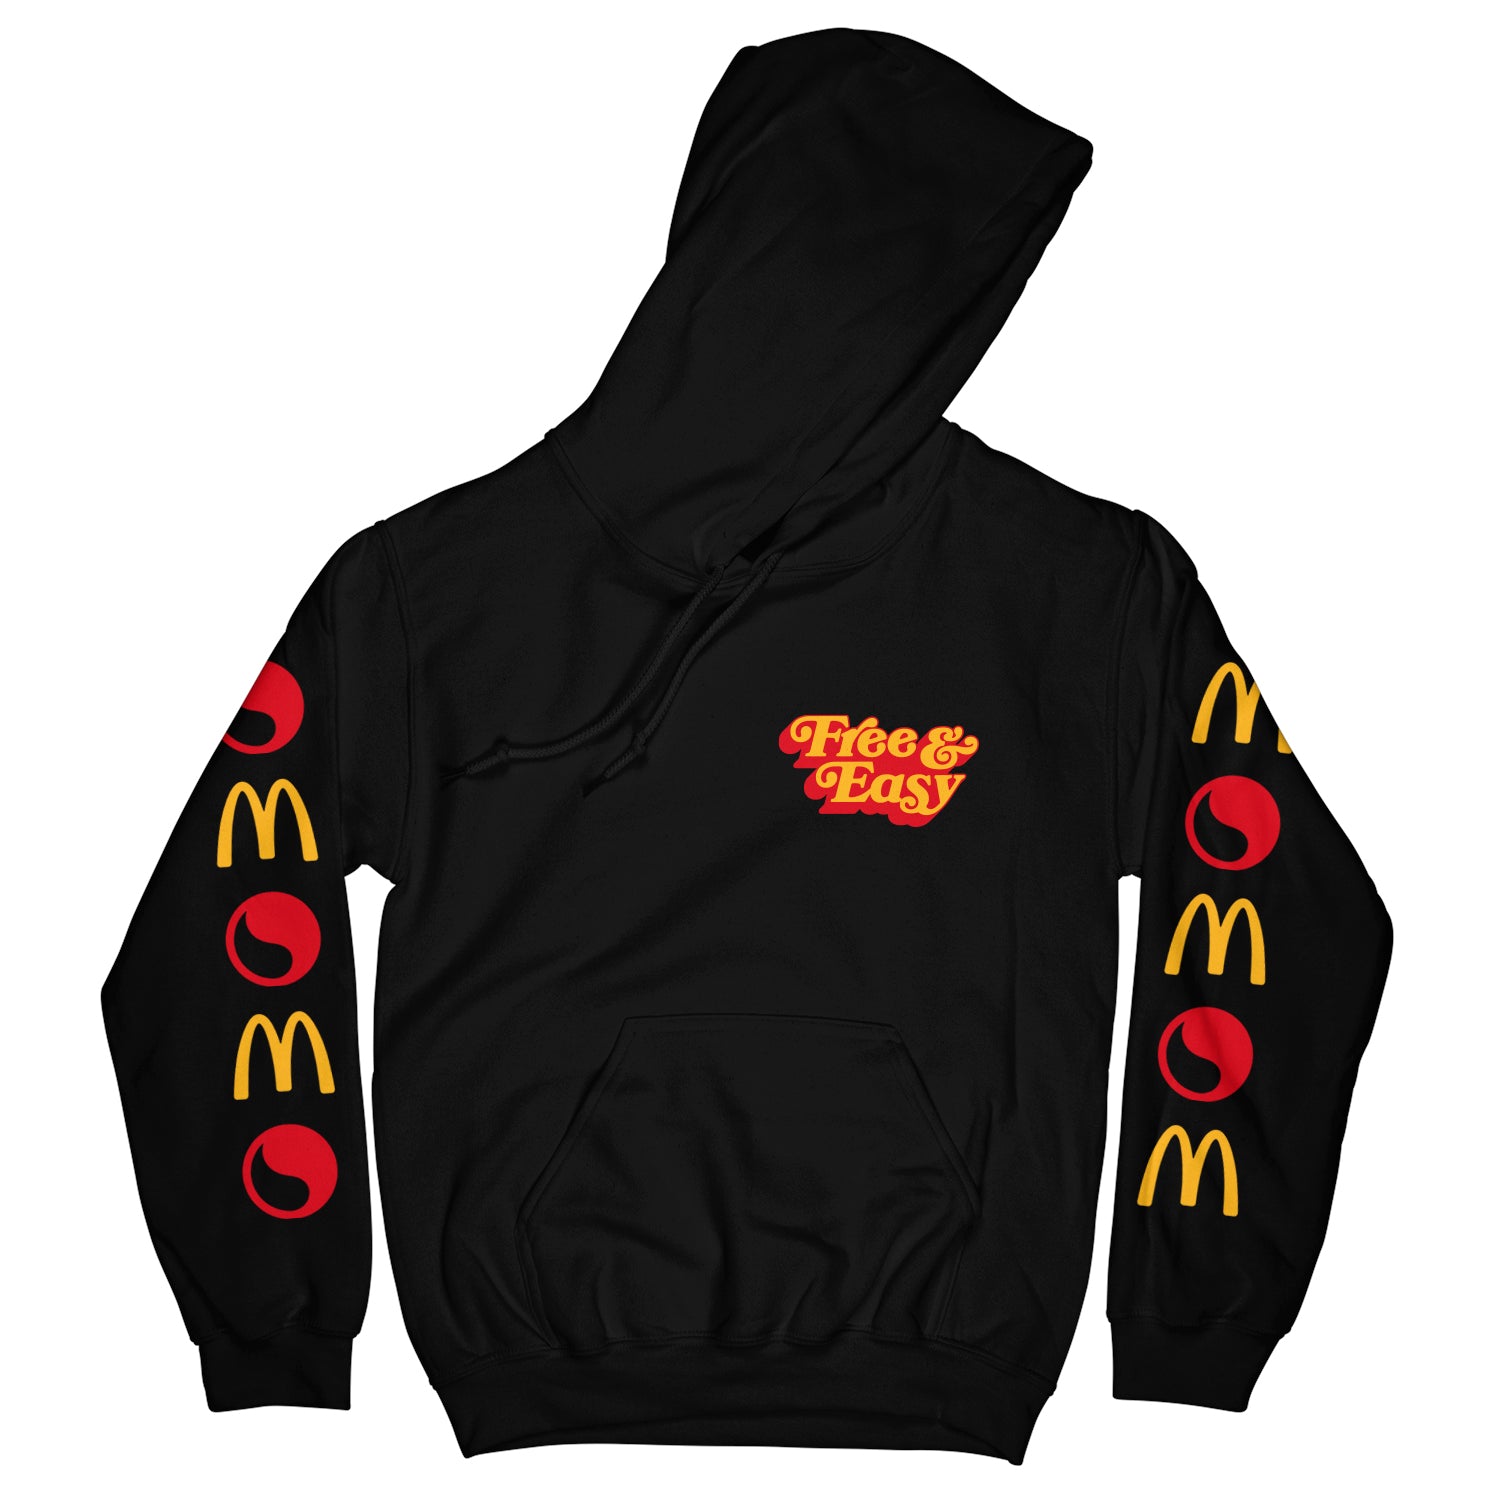 Camp McDonalds Be Happy OG Hoodie in black with yellow and red Free & Easy logo on left front chest and logo sleeves on a white background - Free & Easy